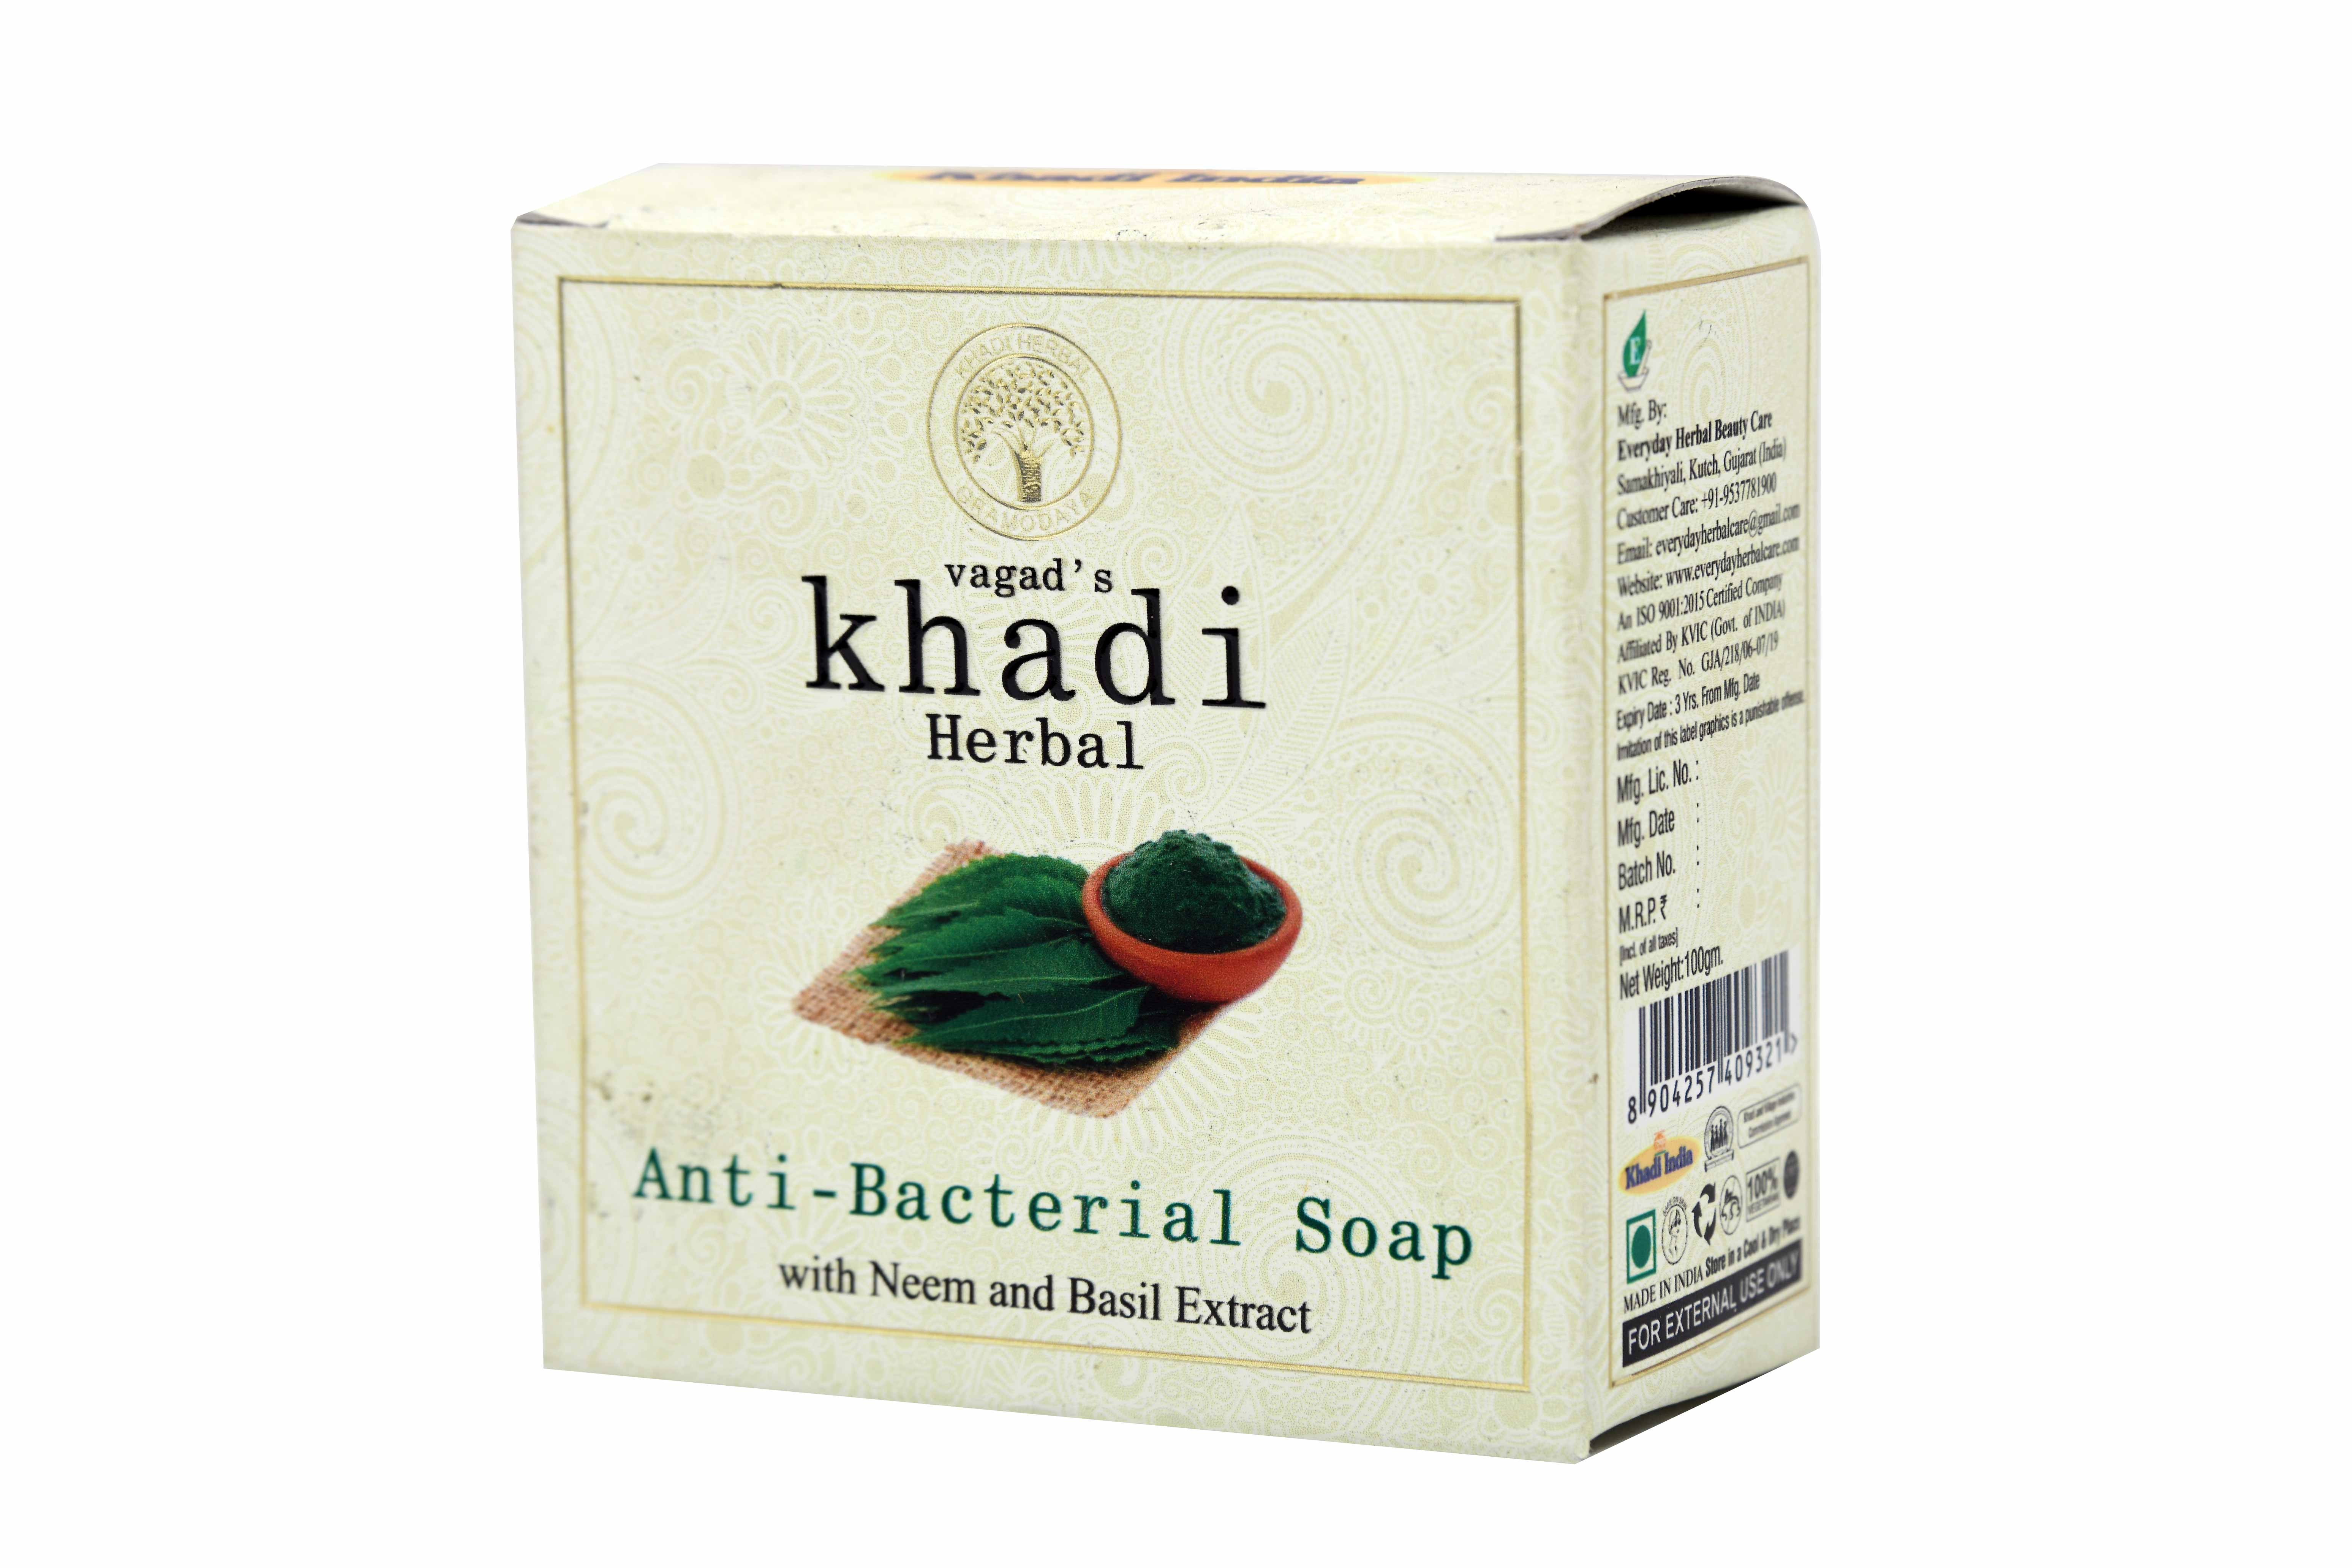 Buy Vagad's Khadi Neem And Basil Extract Anti Bacterial Milky Soap at Best Price Online